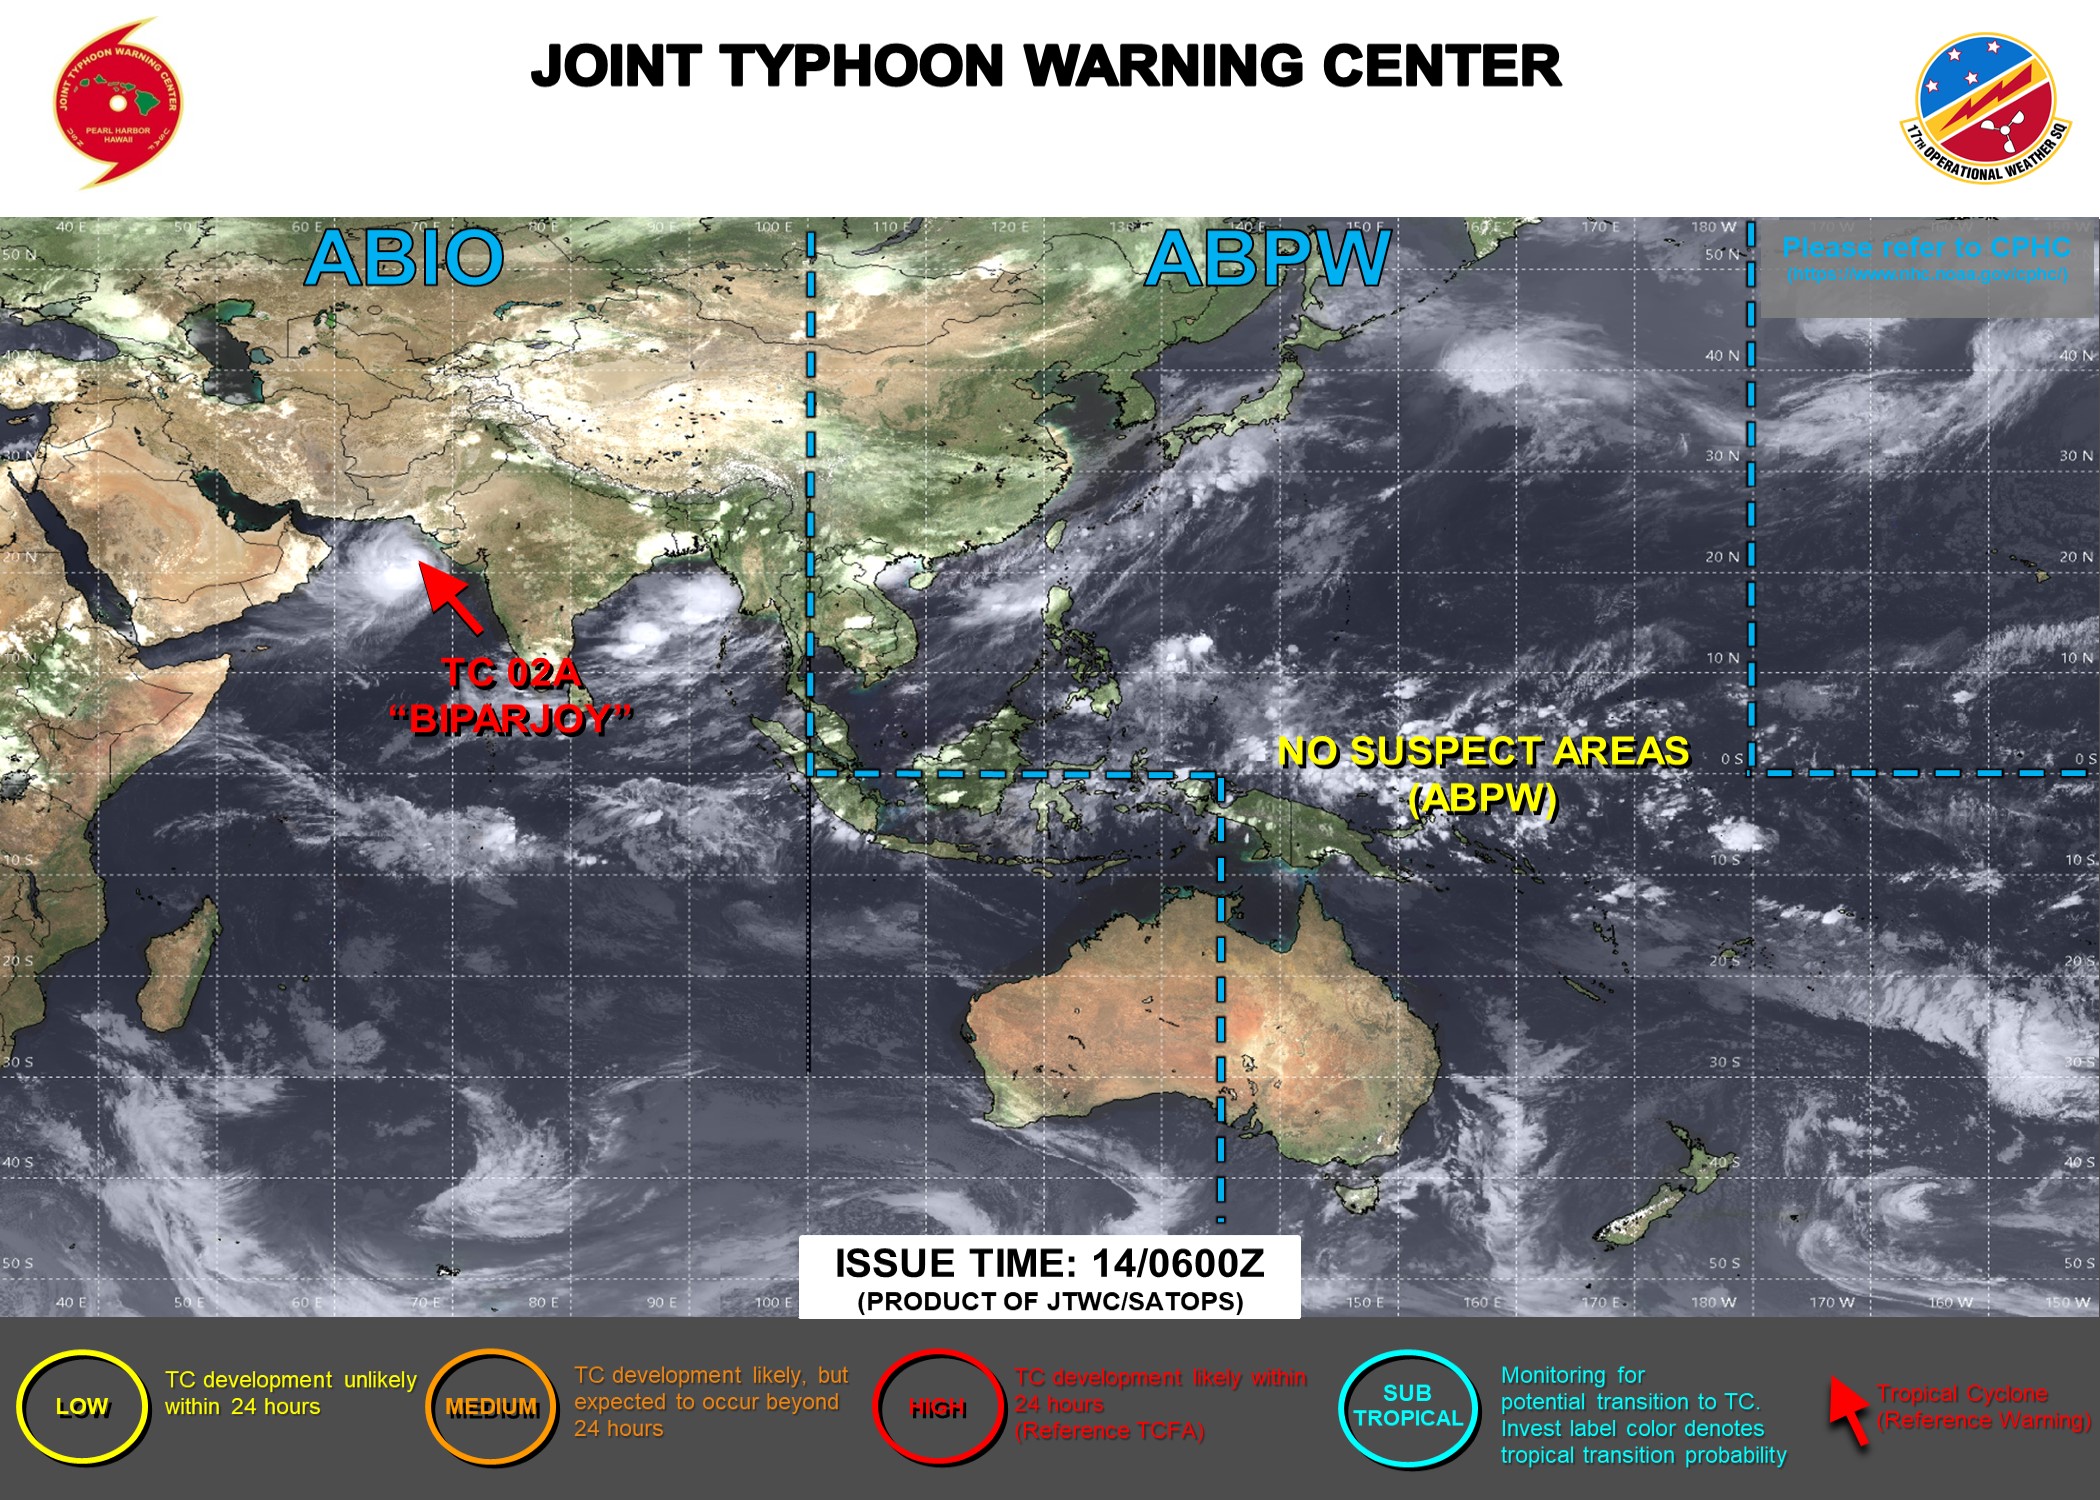 JTWC IS ISSUING 6HOURLY WARNINGS AND 3HOURLY SATELLITE BULLETINS ON TC 02A(BIPARJOY).